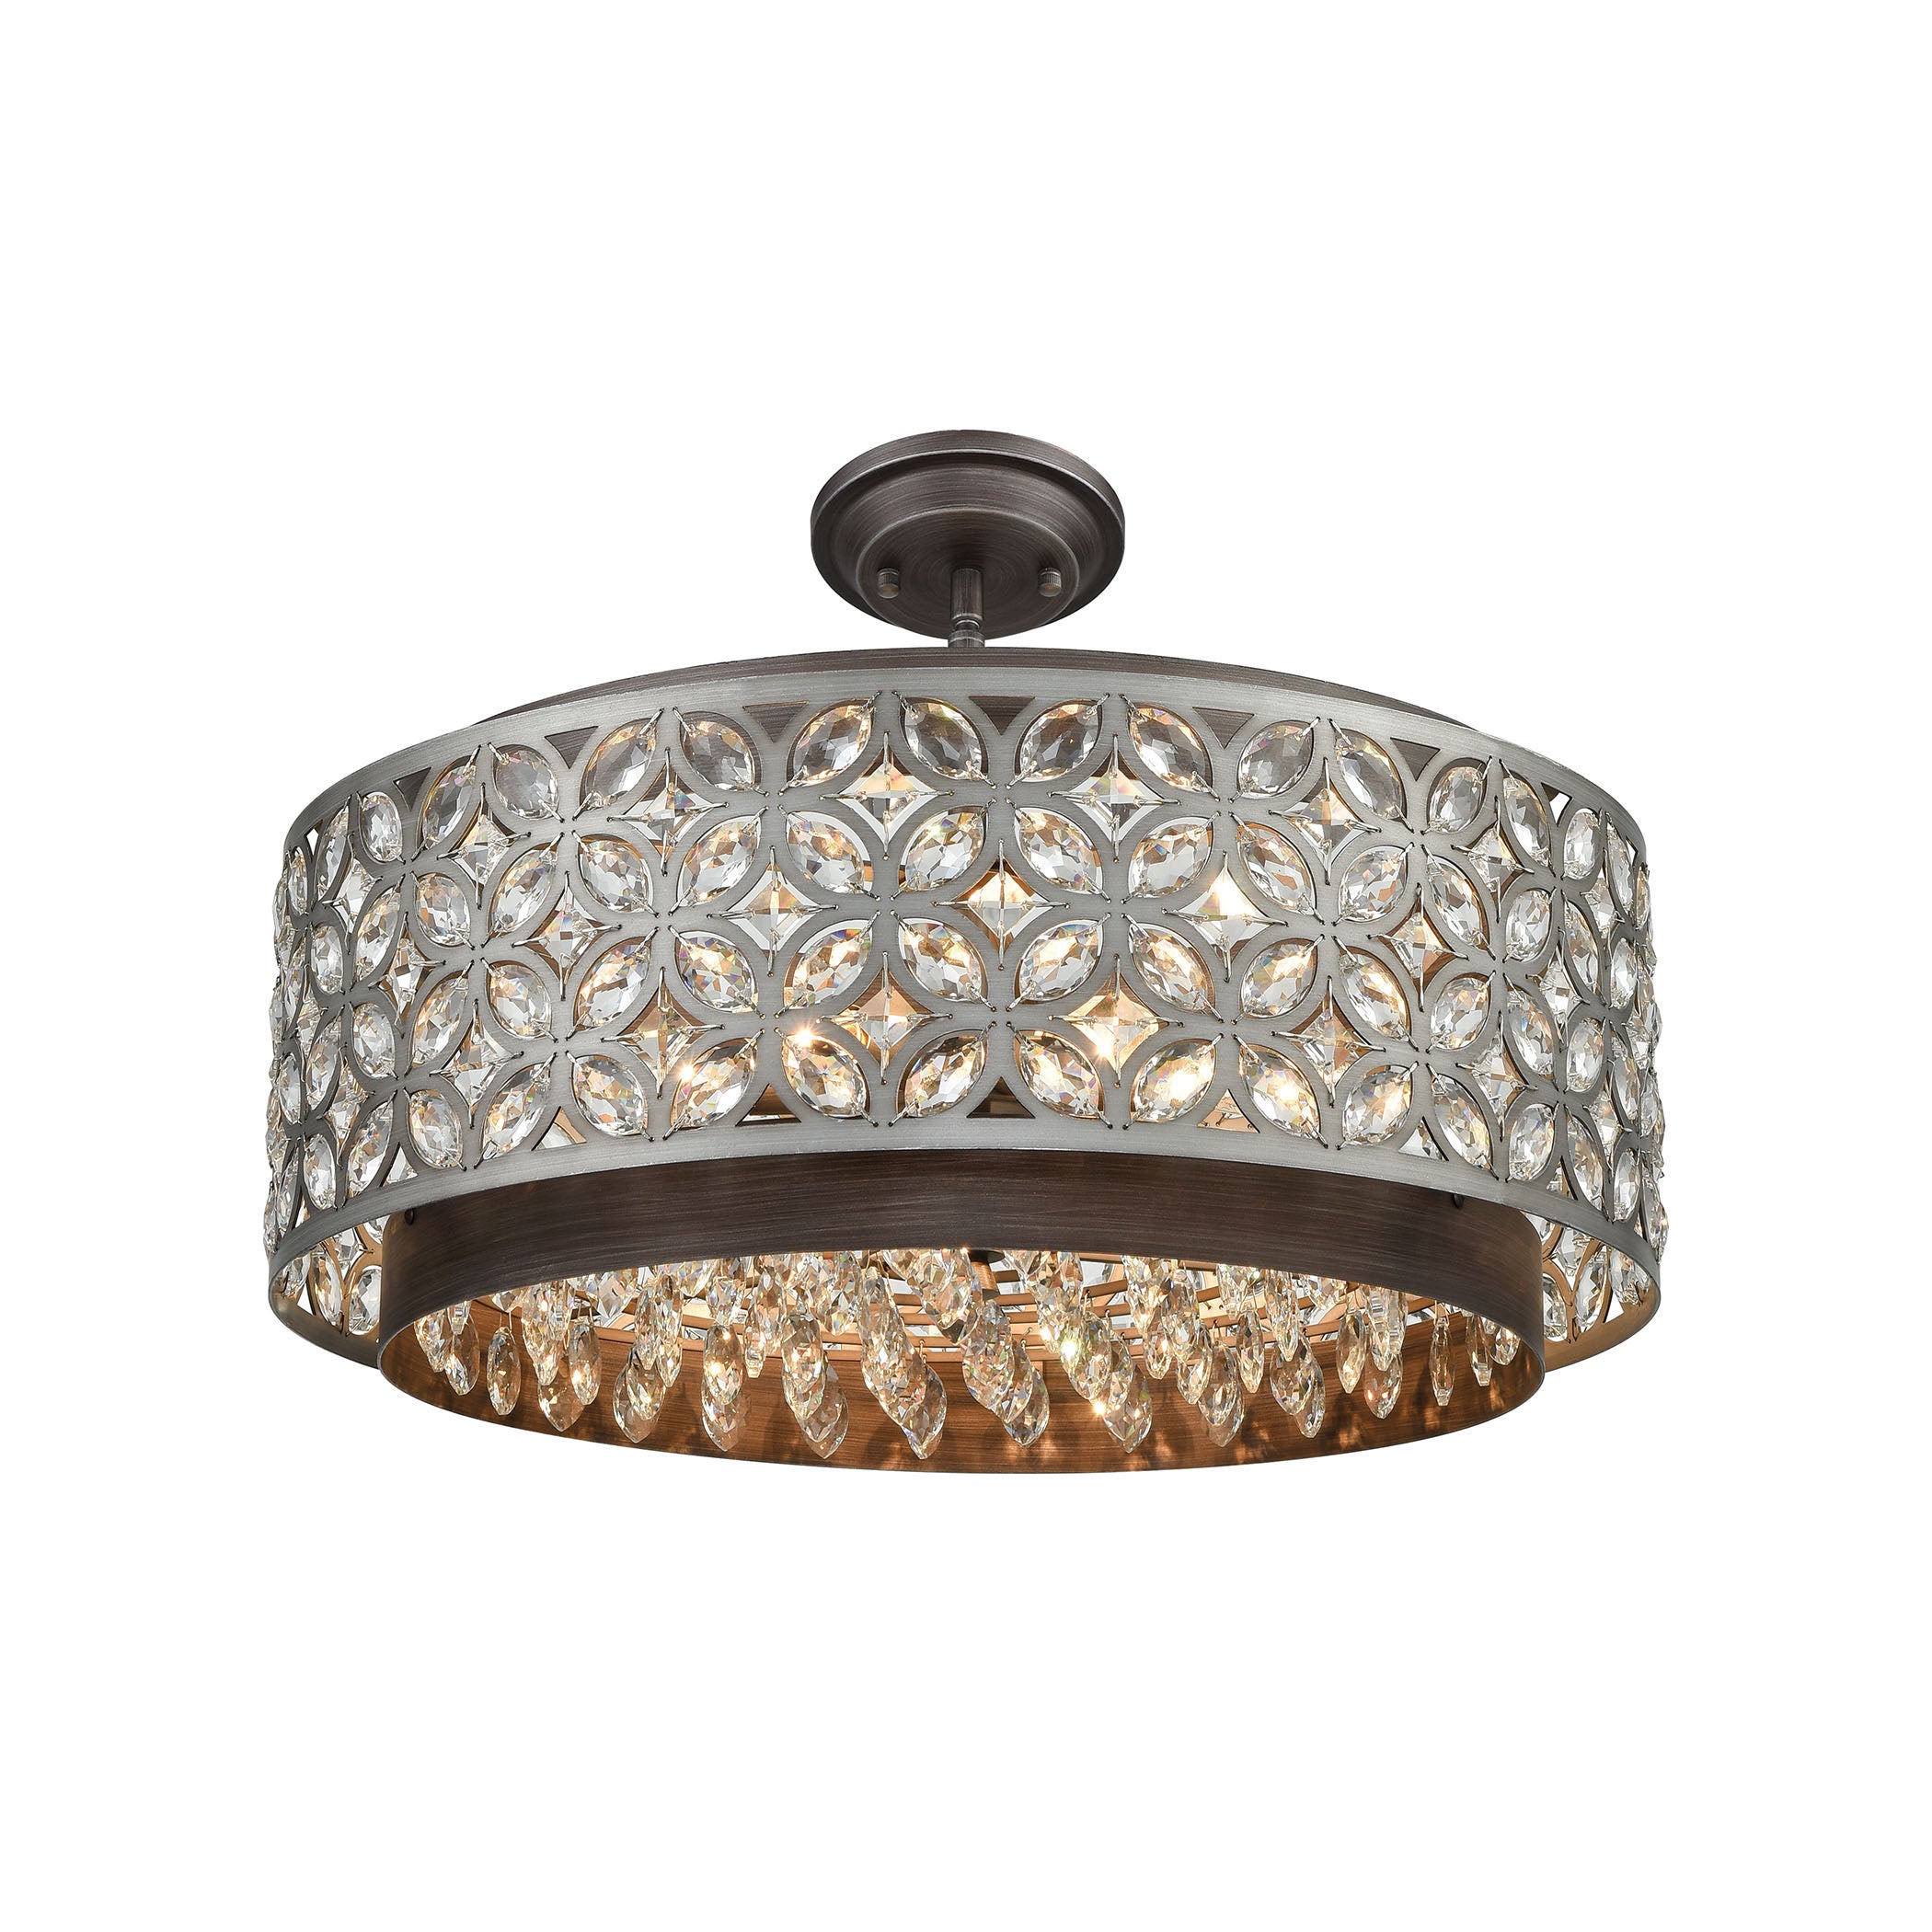 ELK Lighting 12164/6 Rosslyn 6-Light Chandelier in Weathered Zinc and Matte Silver with Crystal and Metalwork Shade